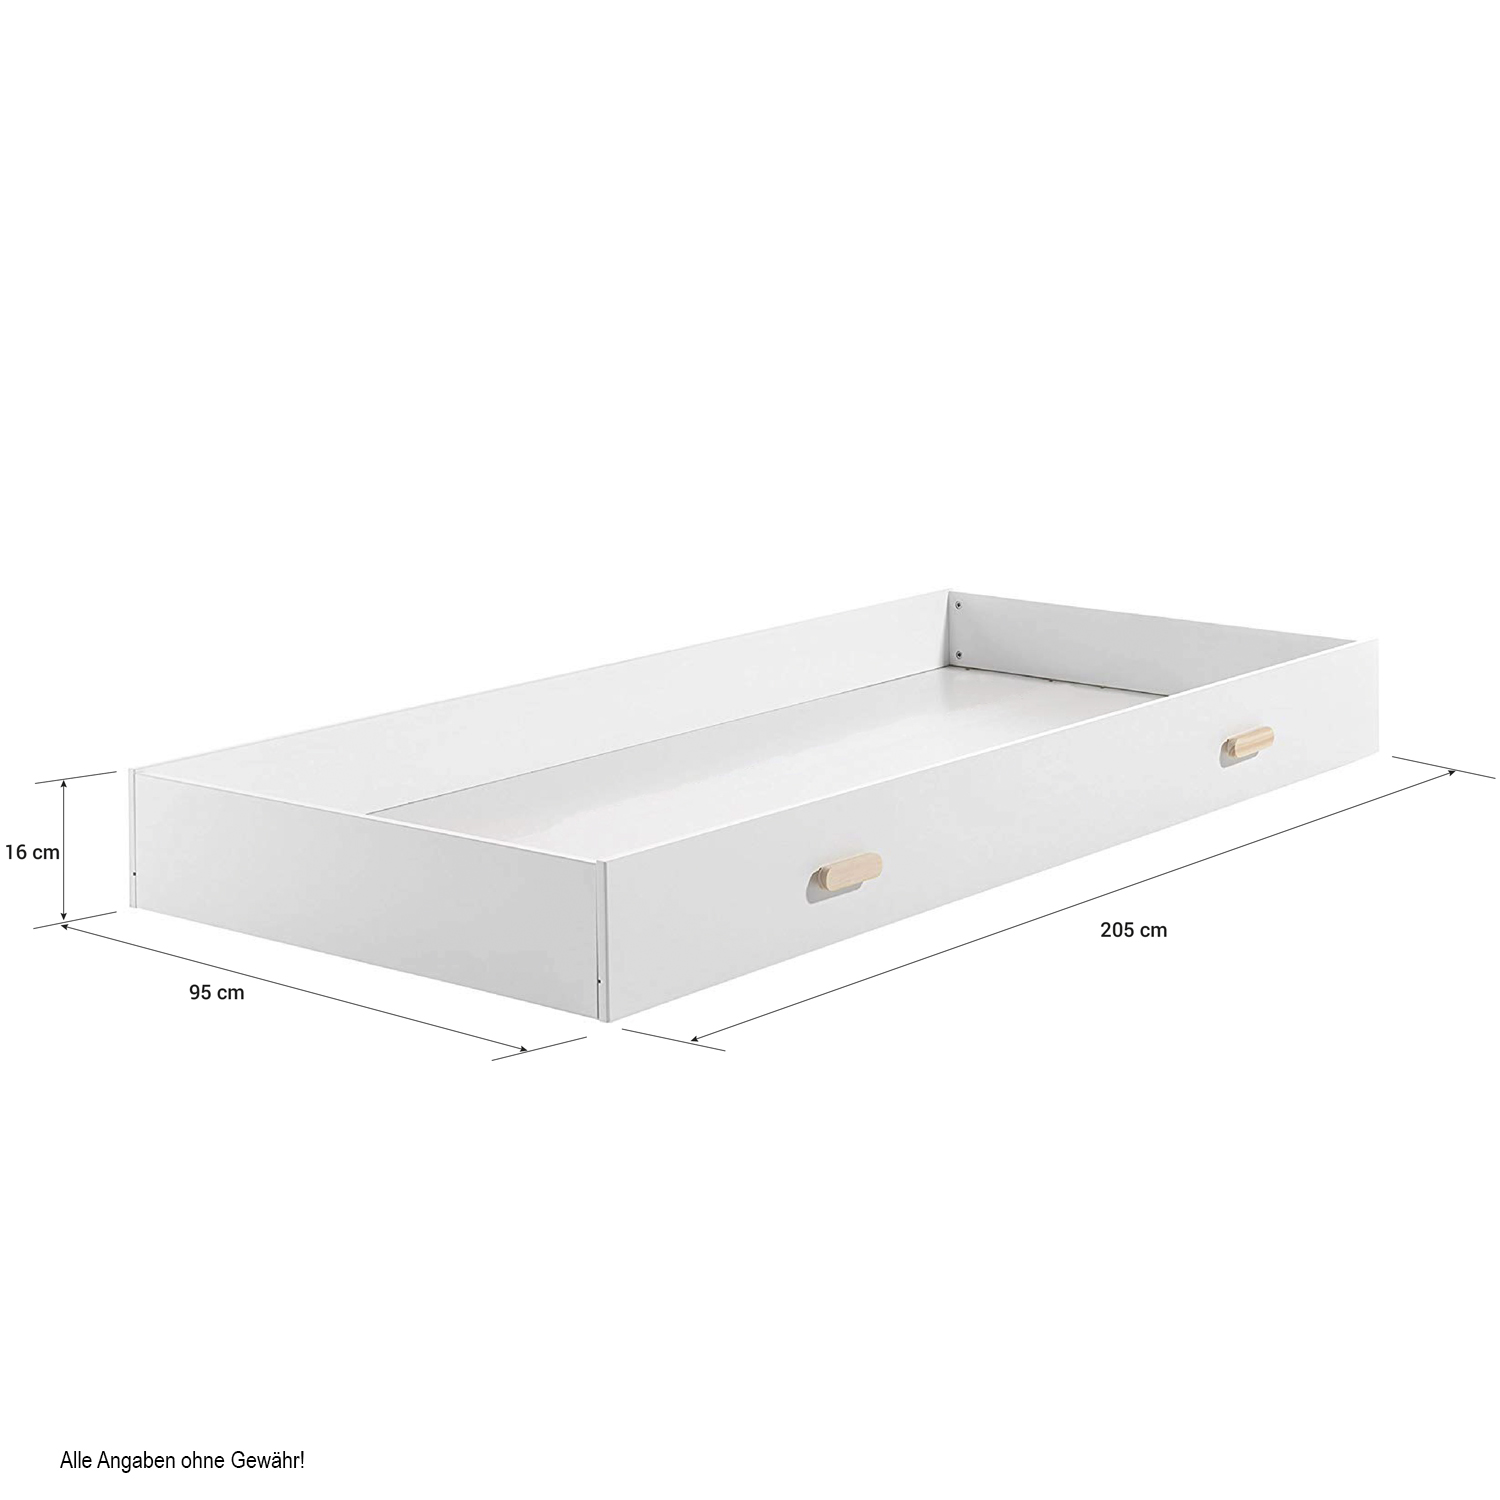 Children's Bed 90x200 House Bed Kids Bed Wooden Bed White Cot Drawer